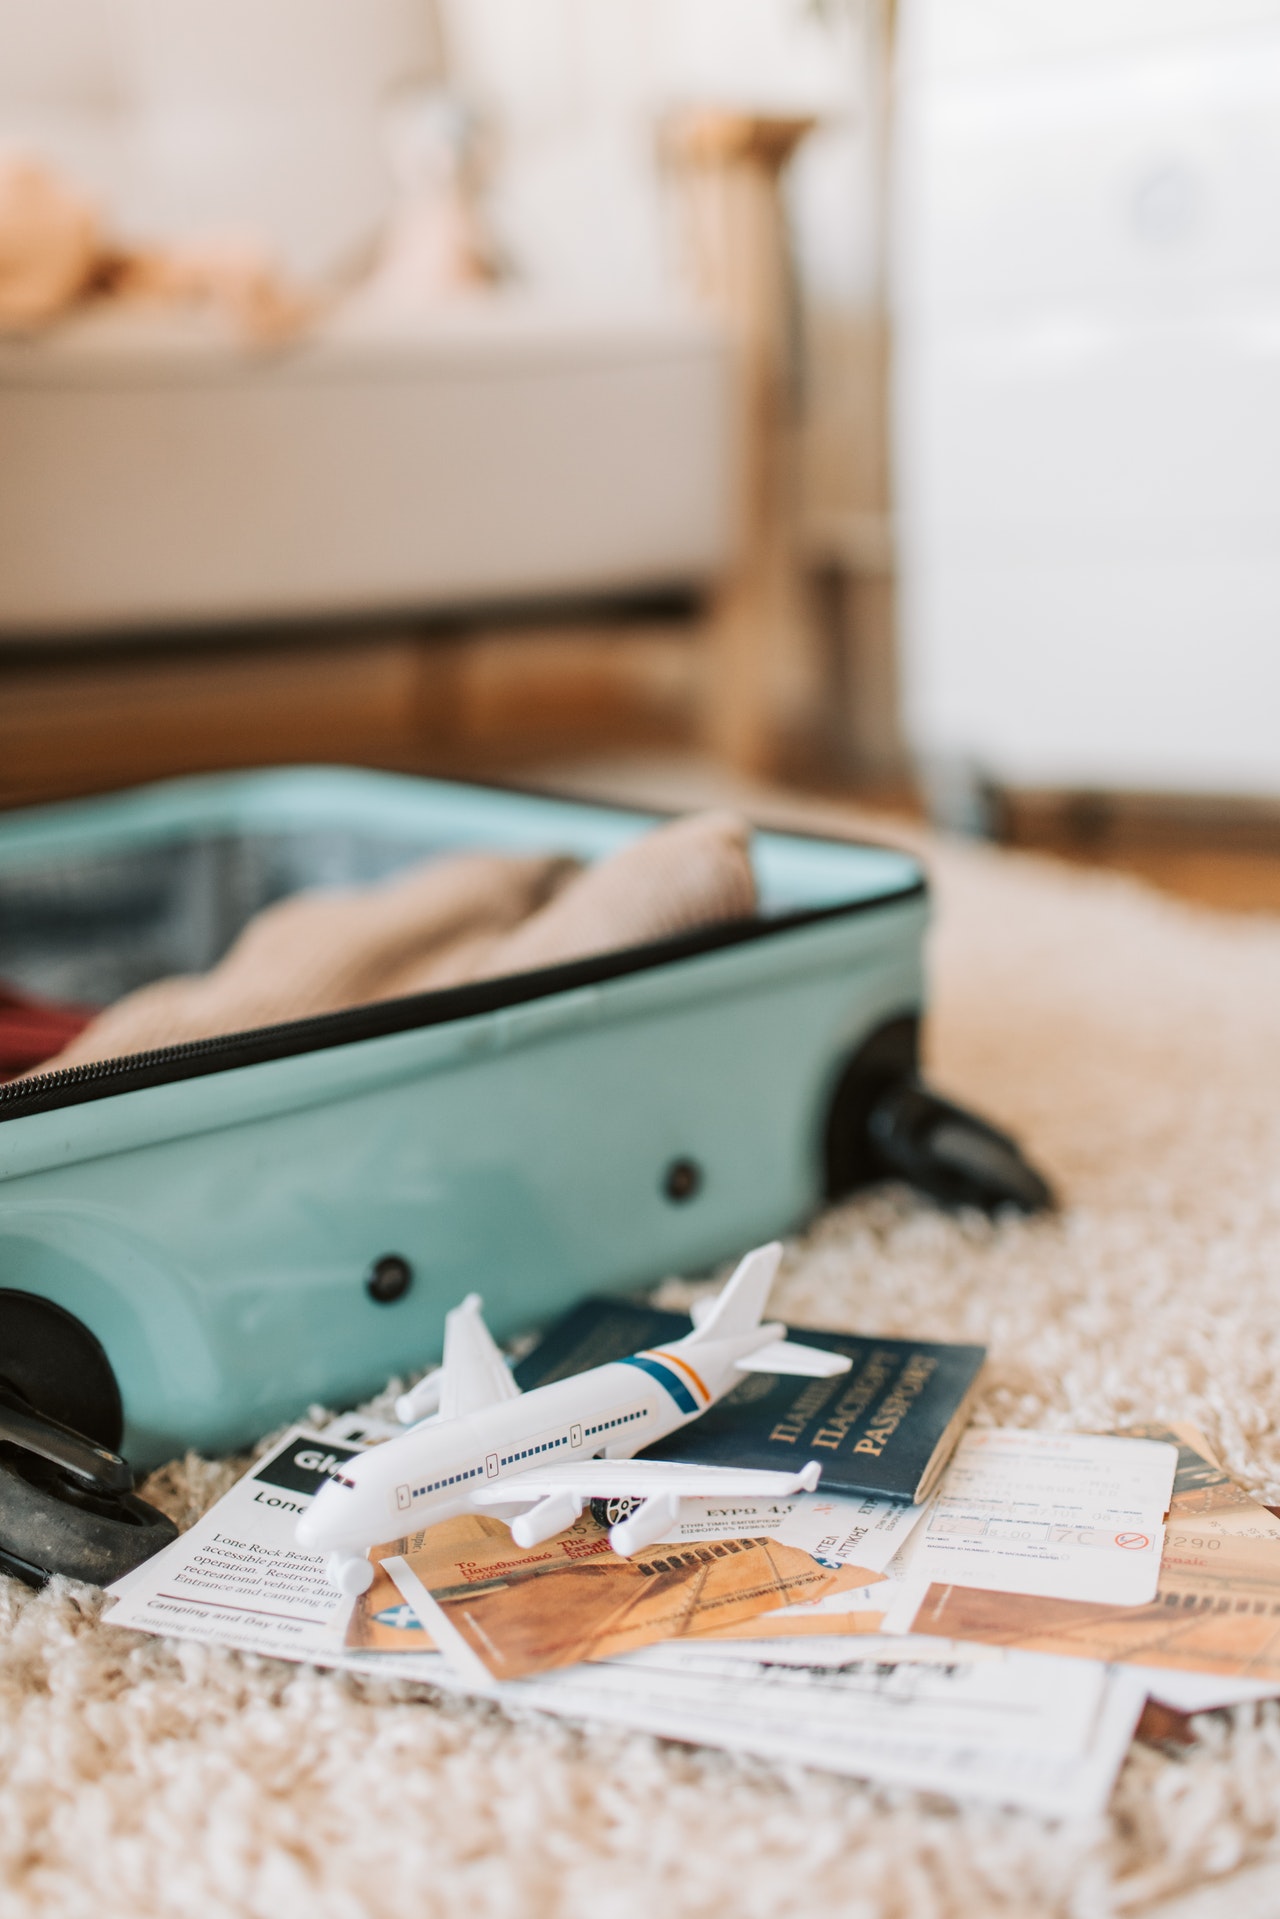 How to Prepare Your Home Before a Big Trip Overseas